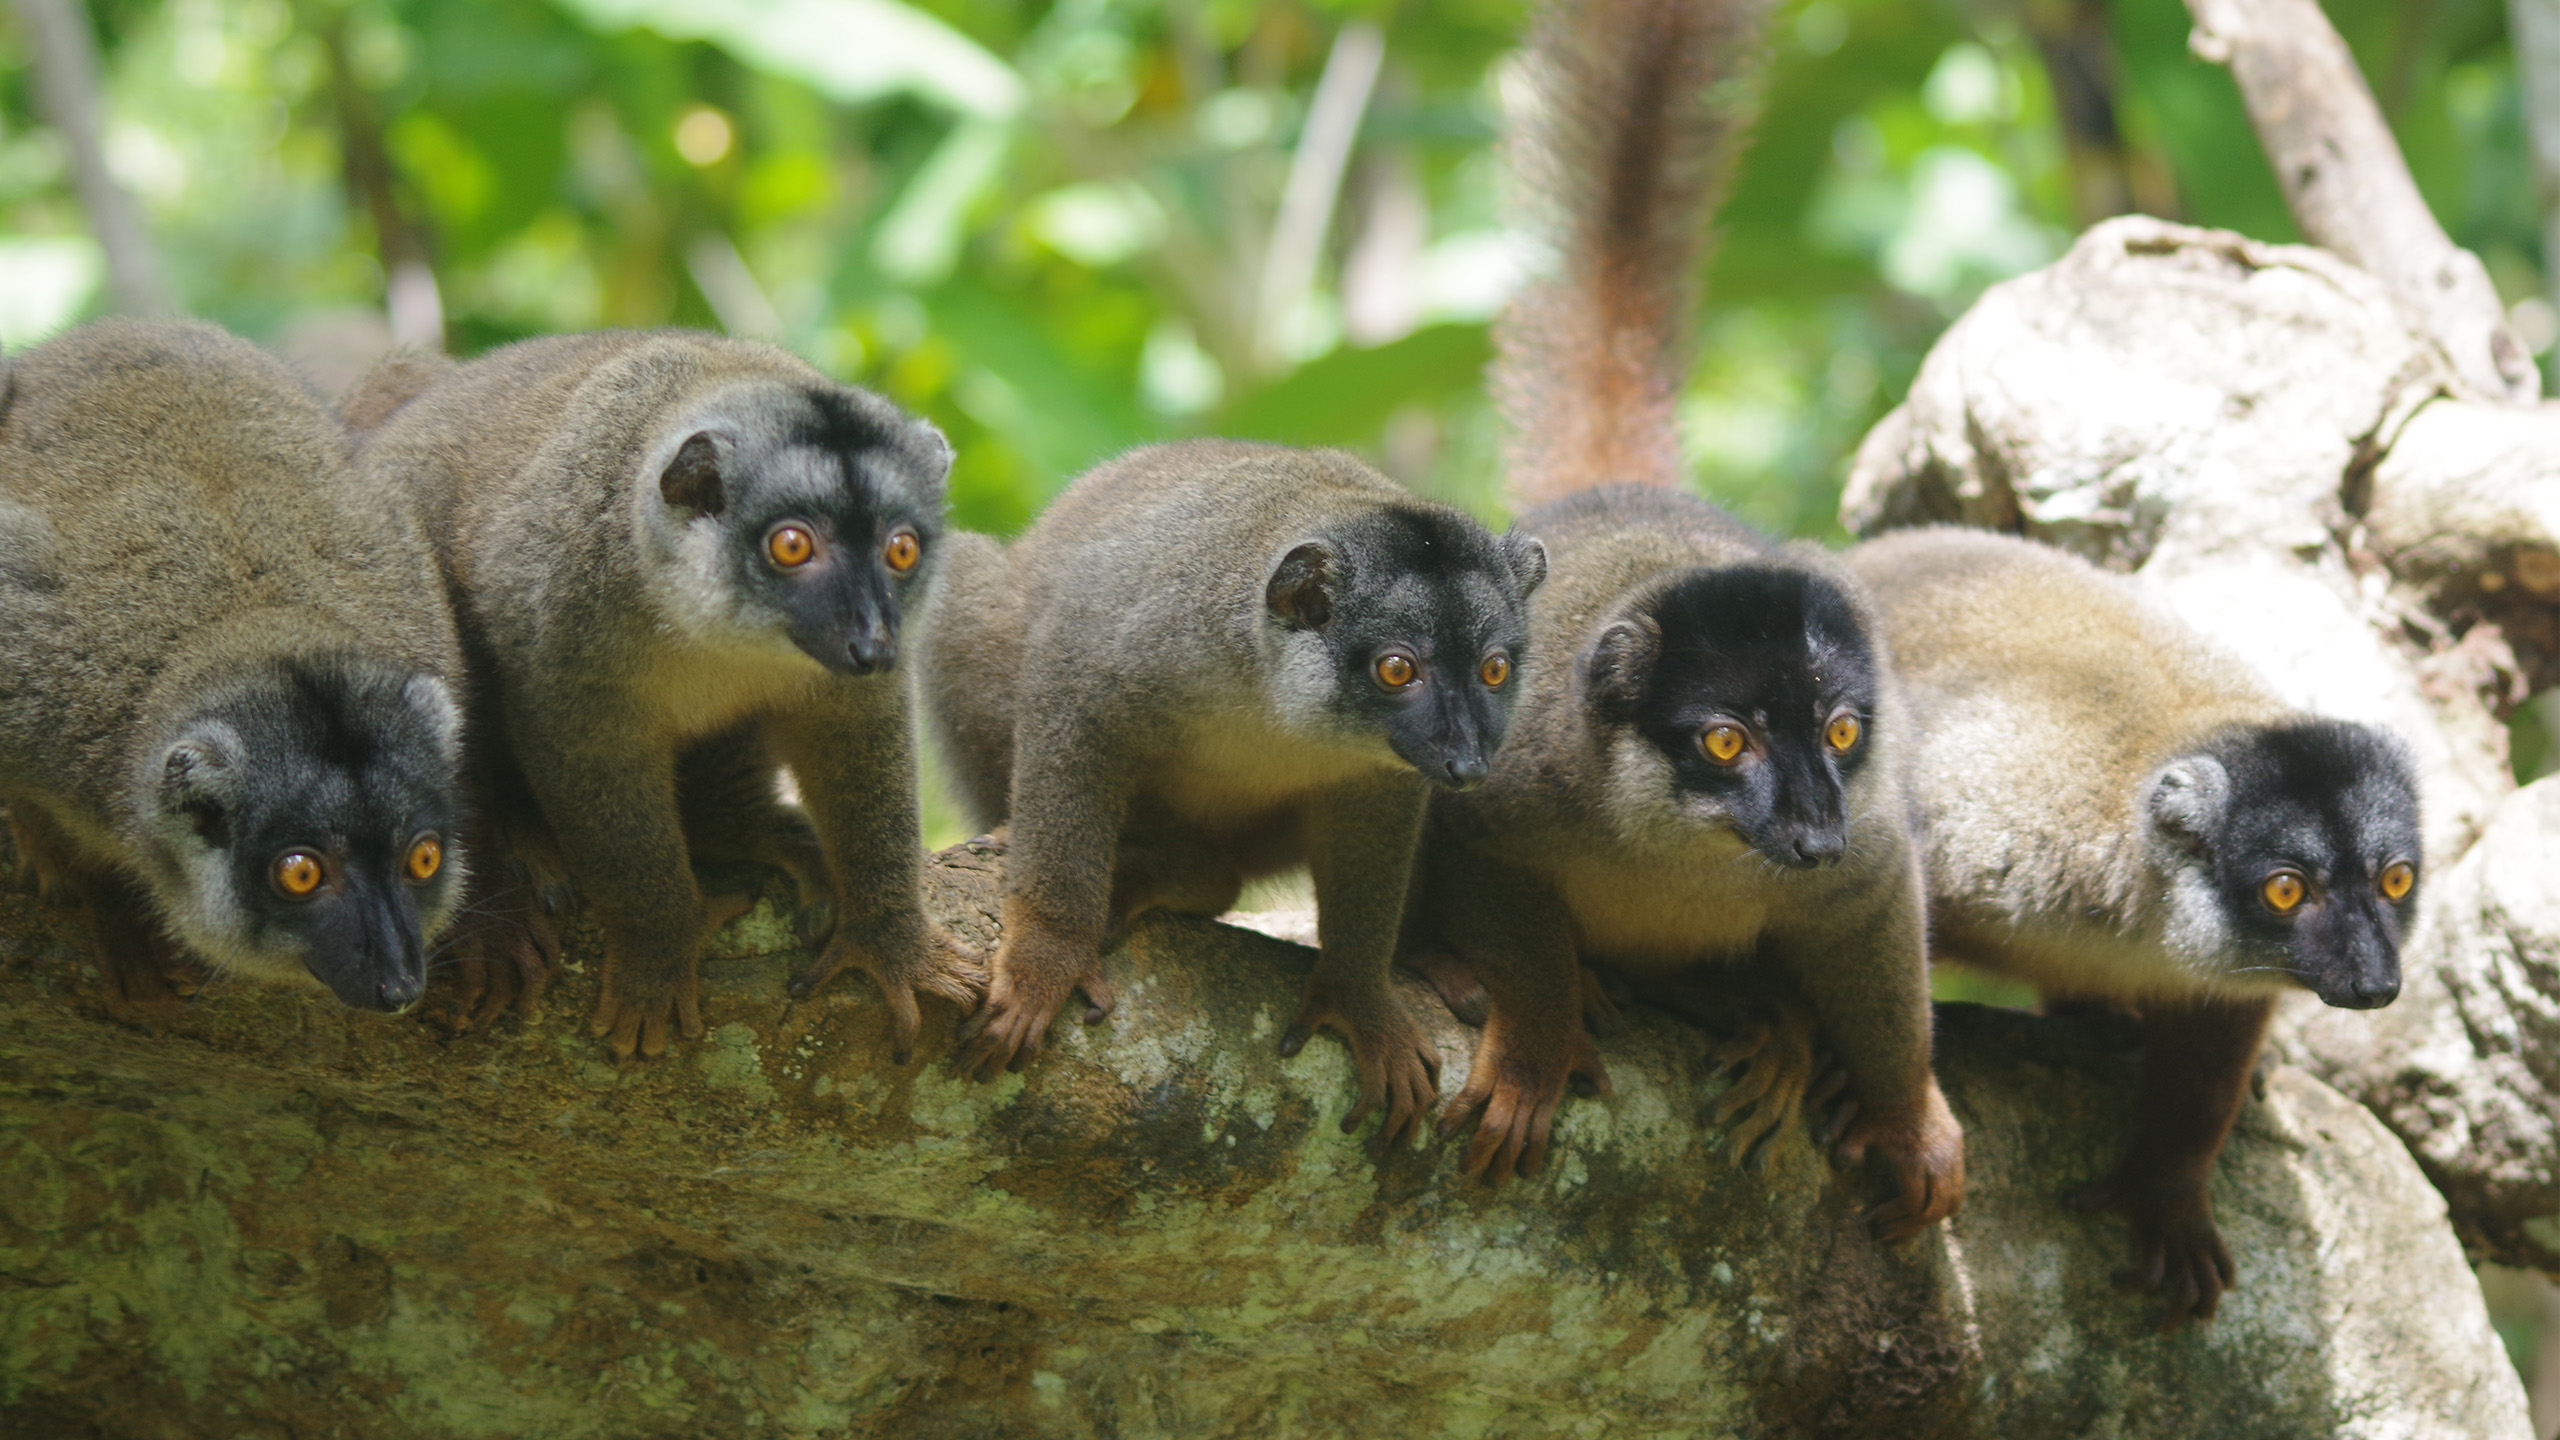 Common brown lemurs (Eulemur fulvus) are widespread and are now also found on Nosy Be. | Jan Czerny, Shutterstock